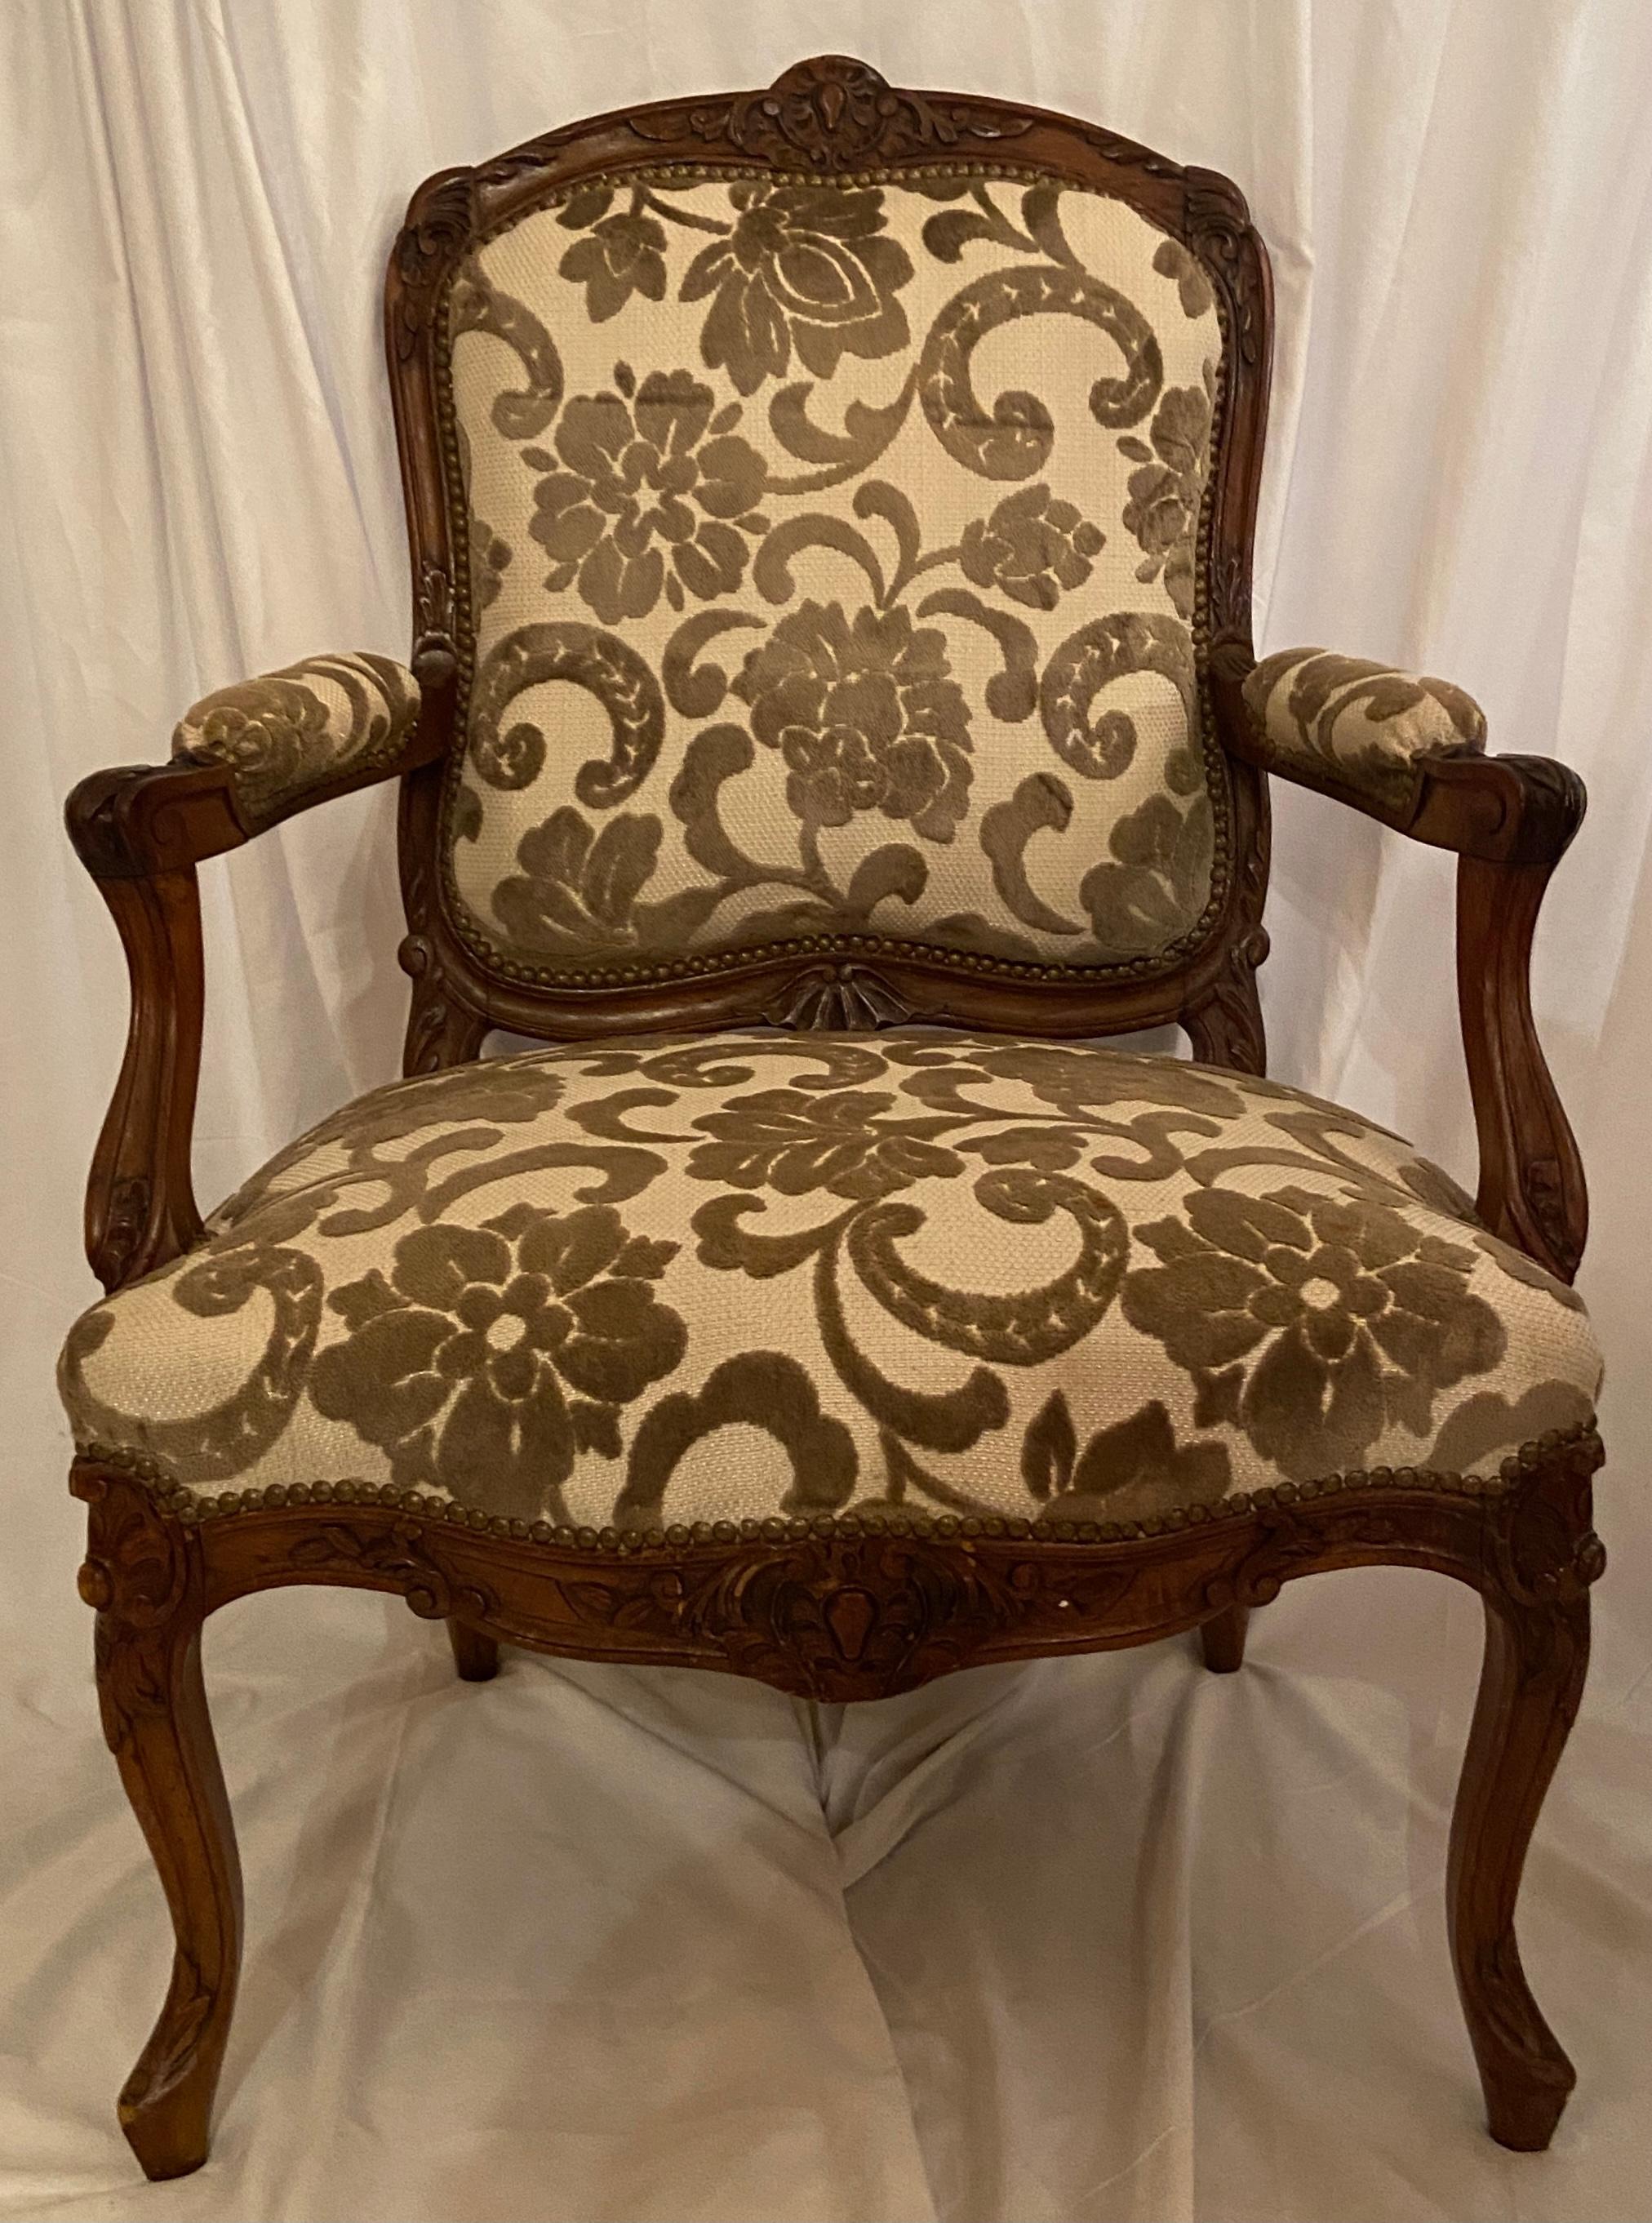 Pair of Antique French carved walnut sage & Ivory upholstered armchairs, Circa 1860.
These nicely carved armchairs would fit in a traditional or contemporary setting.